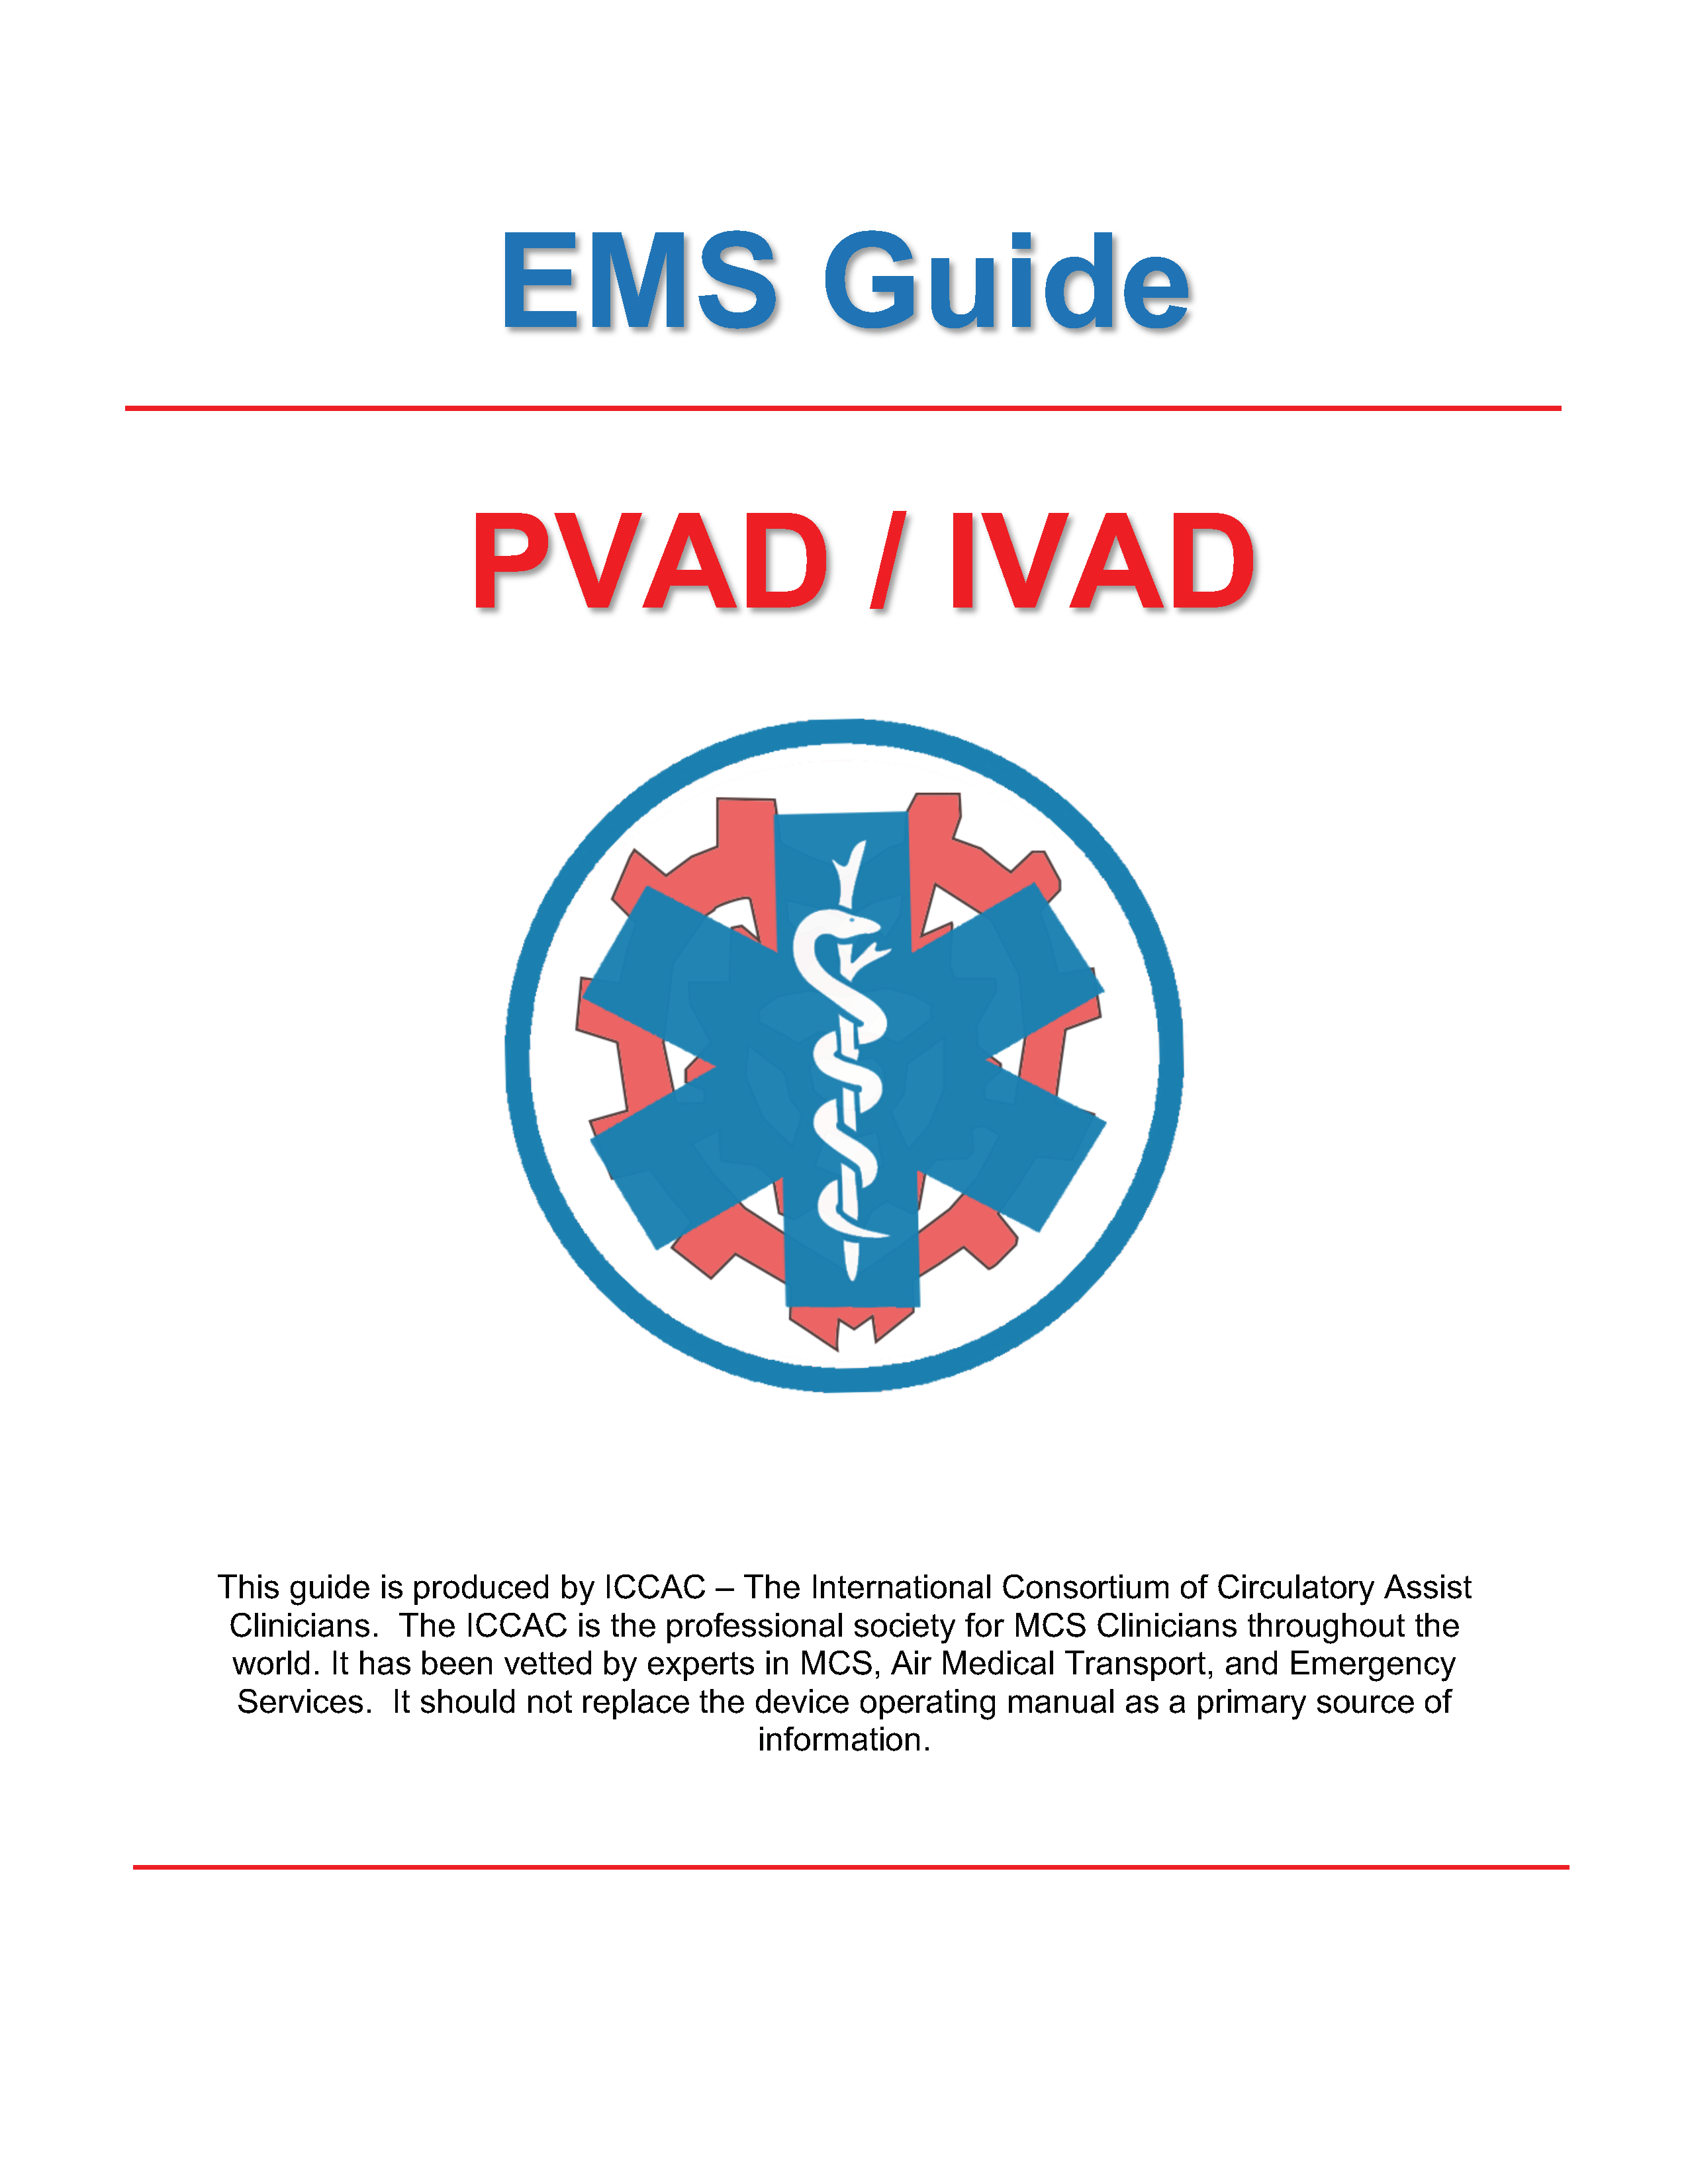 PVAD-IVAD EMS cover.png